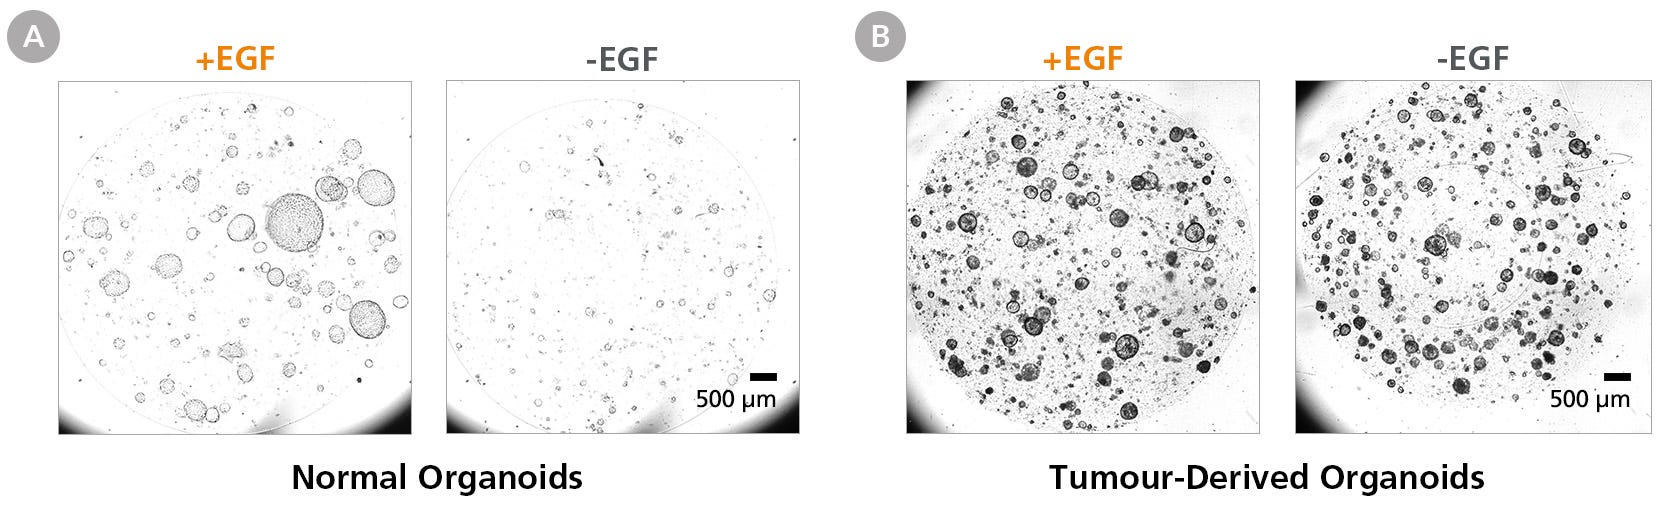 Removing Epidermal Growth Factor (EGF) Abrogates Normal Pancreatic Duct Organoid Growth but Does Not Affect PDAC Organoids Cultured in PancreaCult™ (Human)